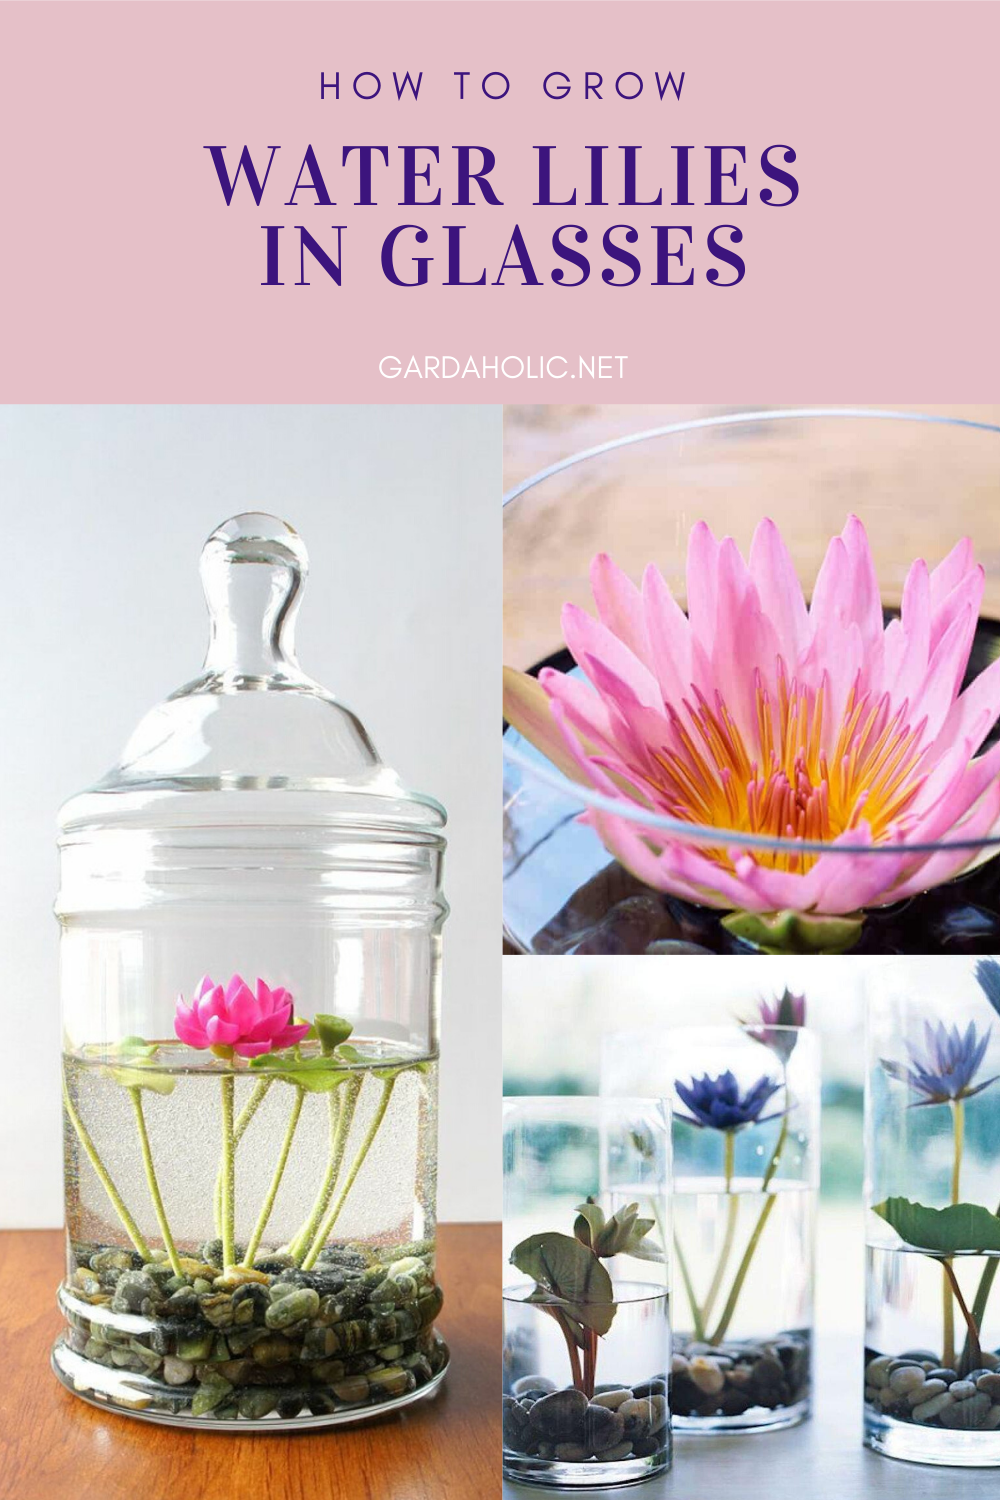 How To Grow Water Lilies In Glasses -   19 water planting Interior ideas